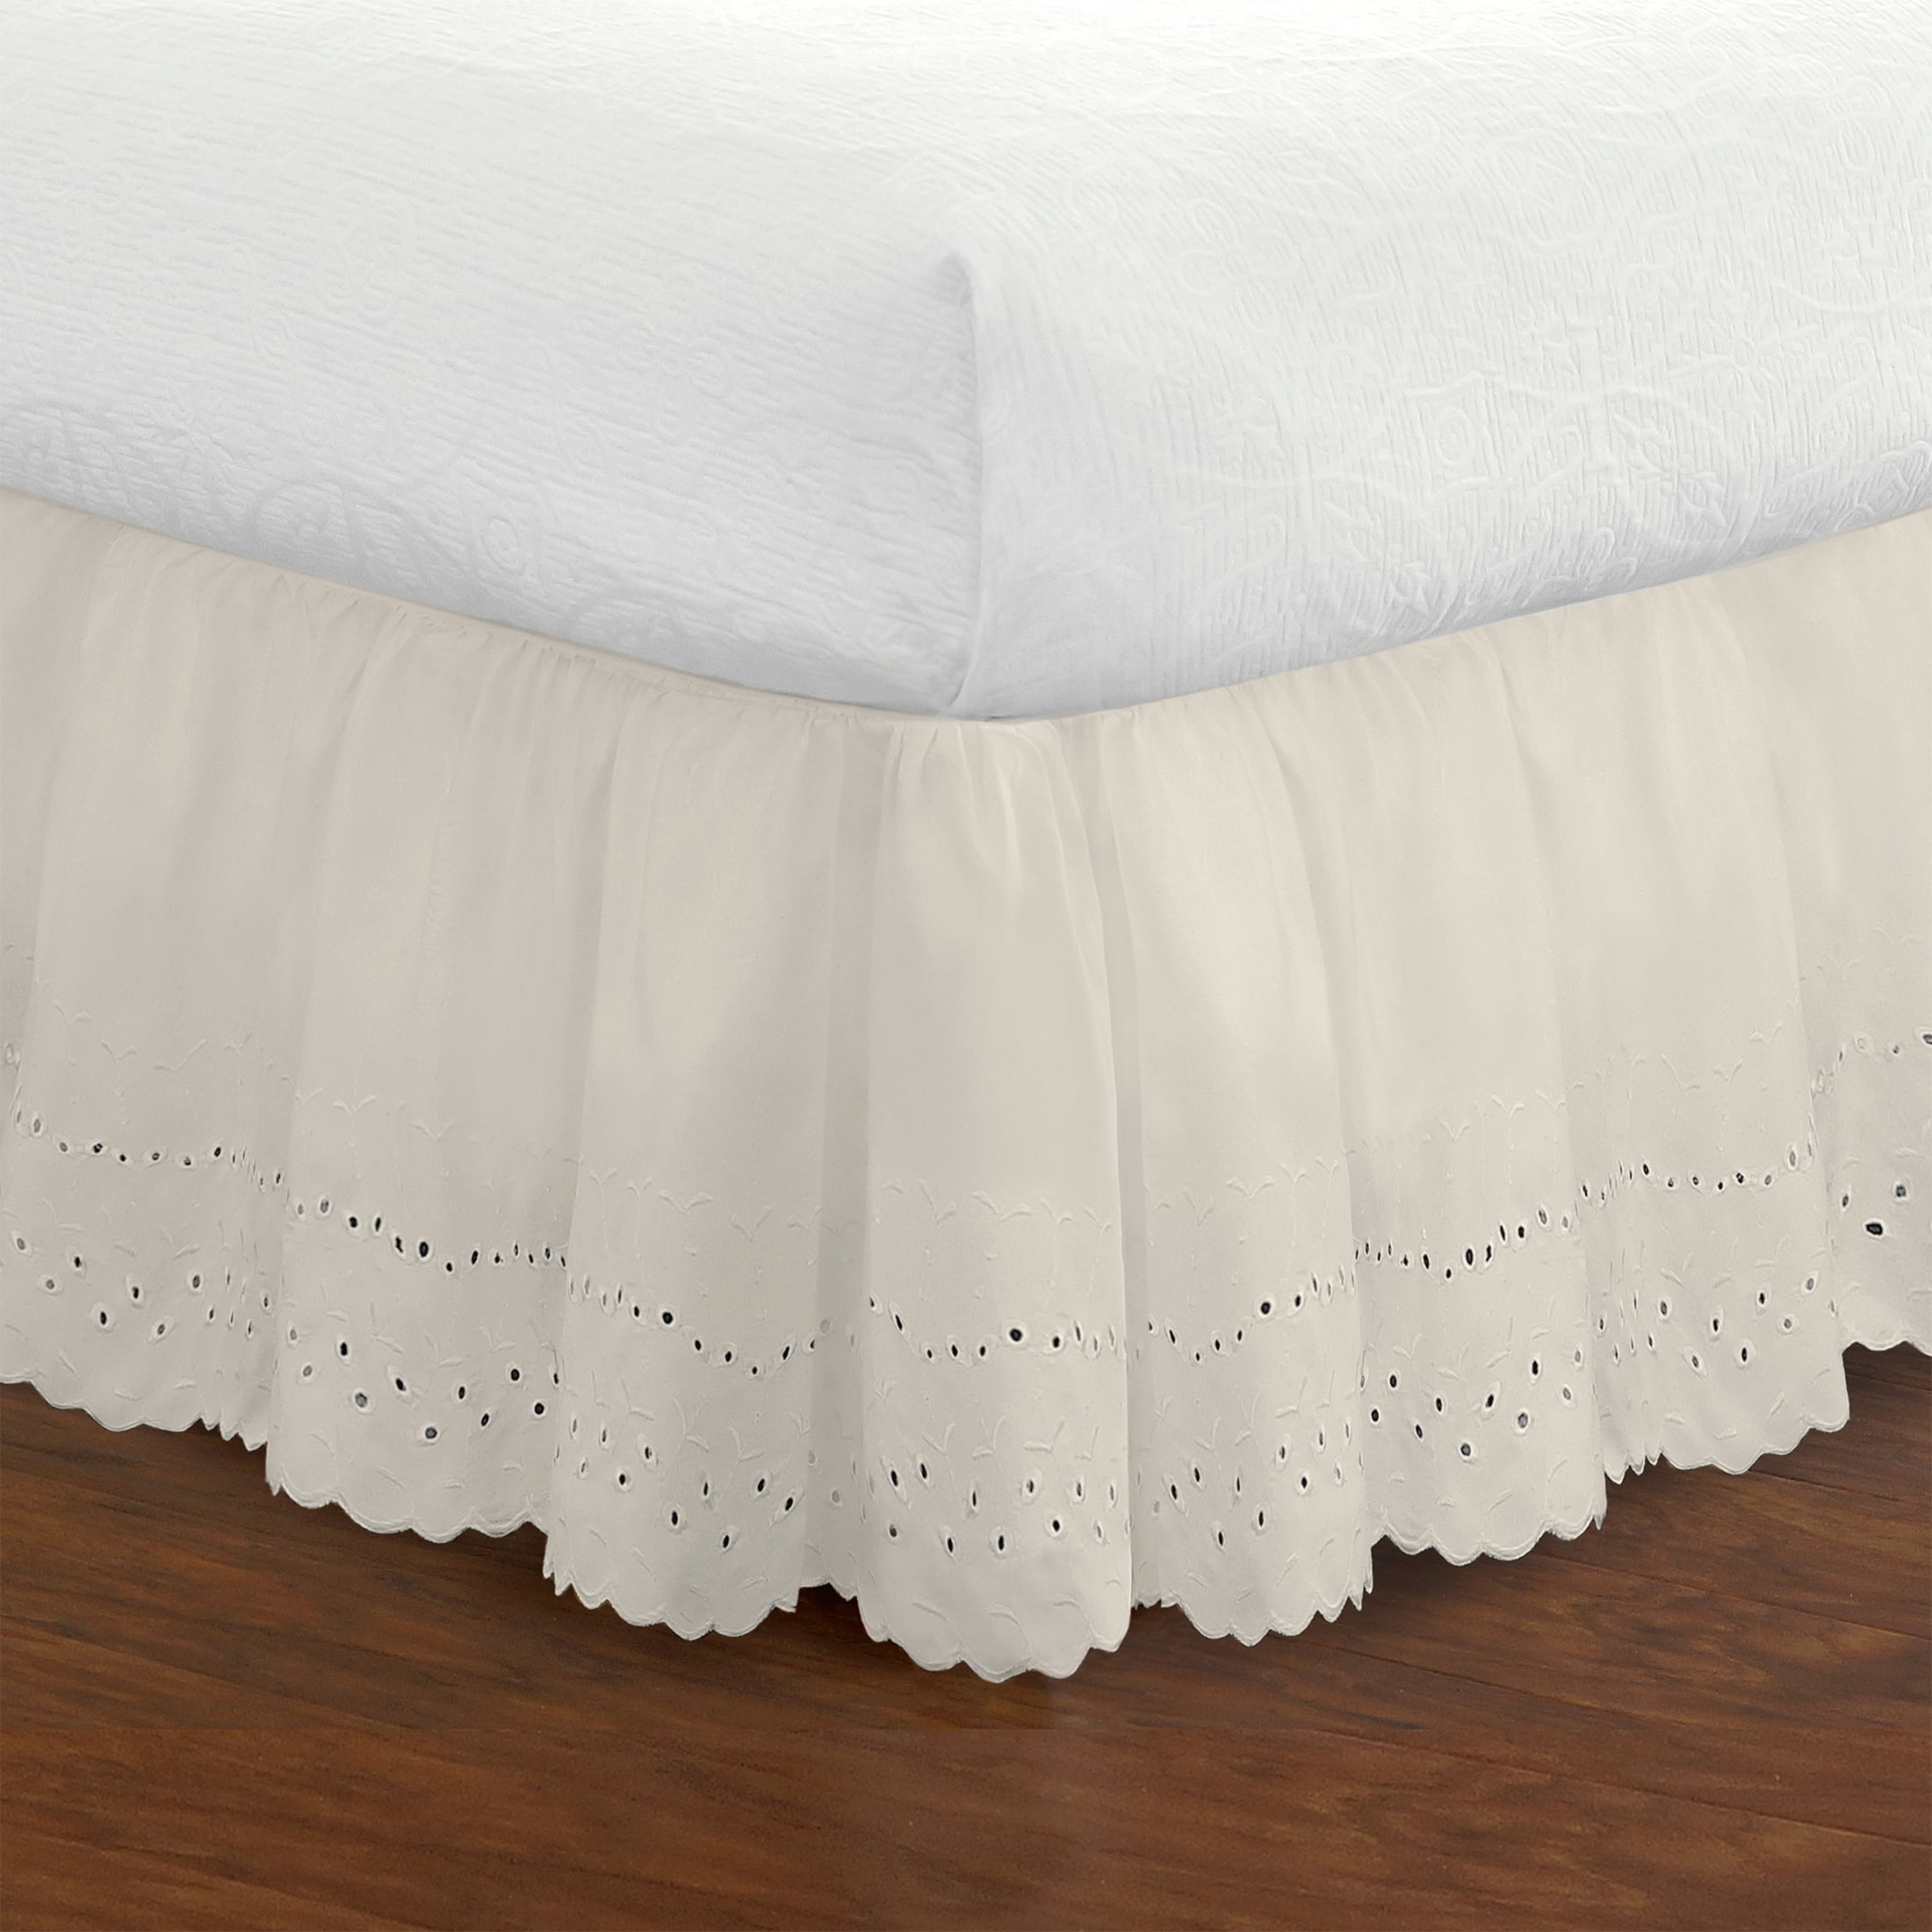 WHITE EYELET DUST RUFFLE ELASTIC BEDSKIRT 14" DROP---TWIN----ALSO COMES IN BEIGE 